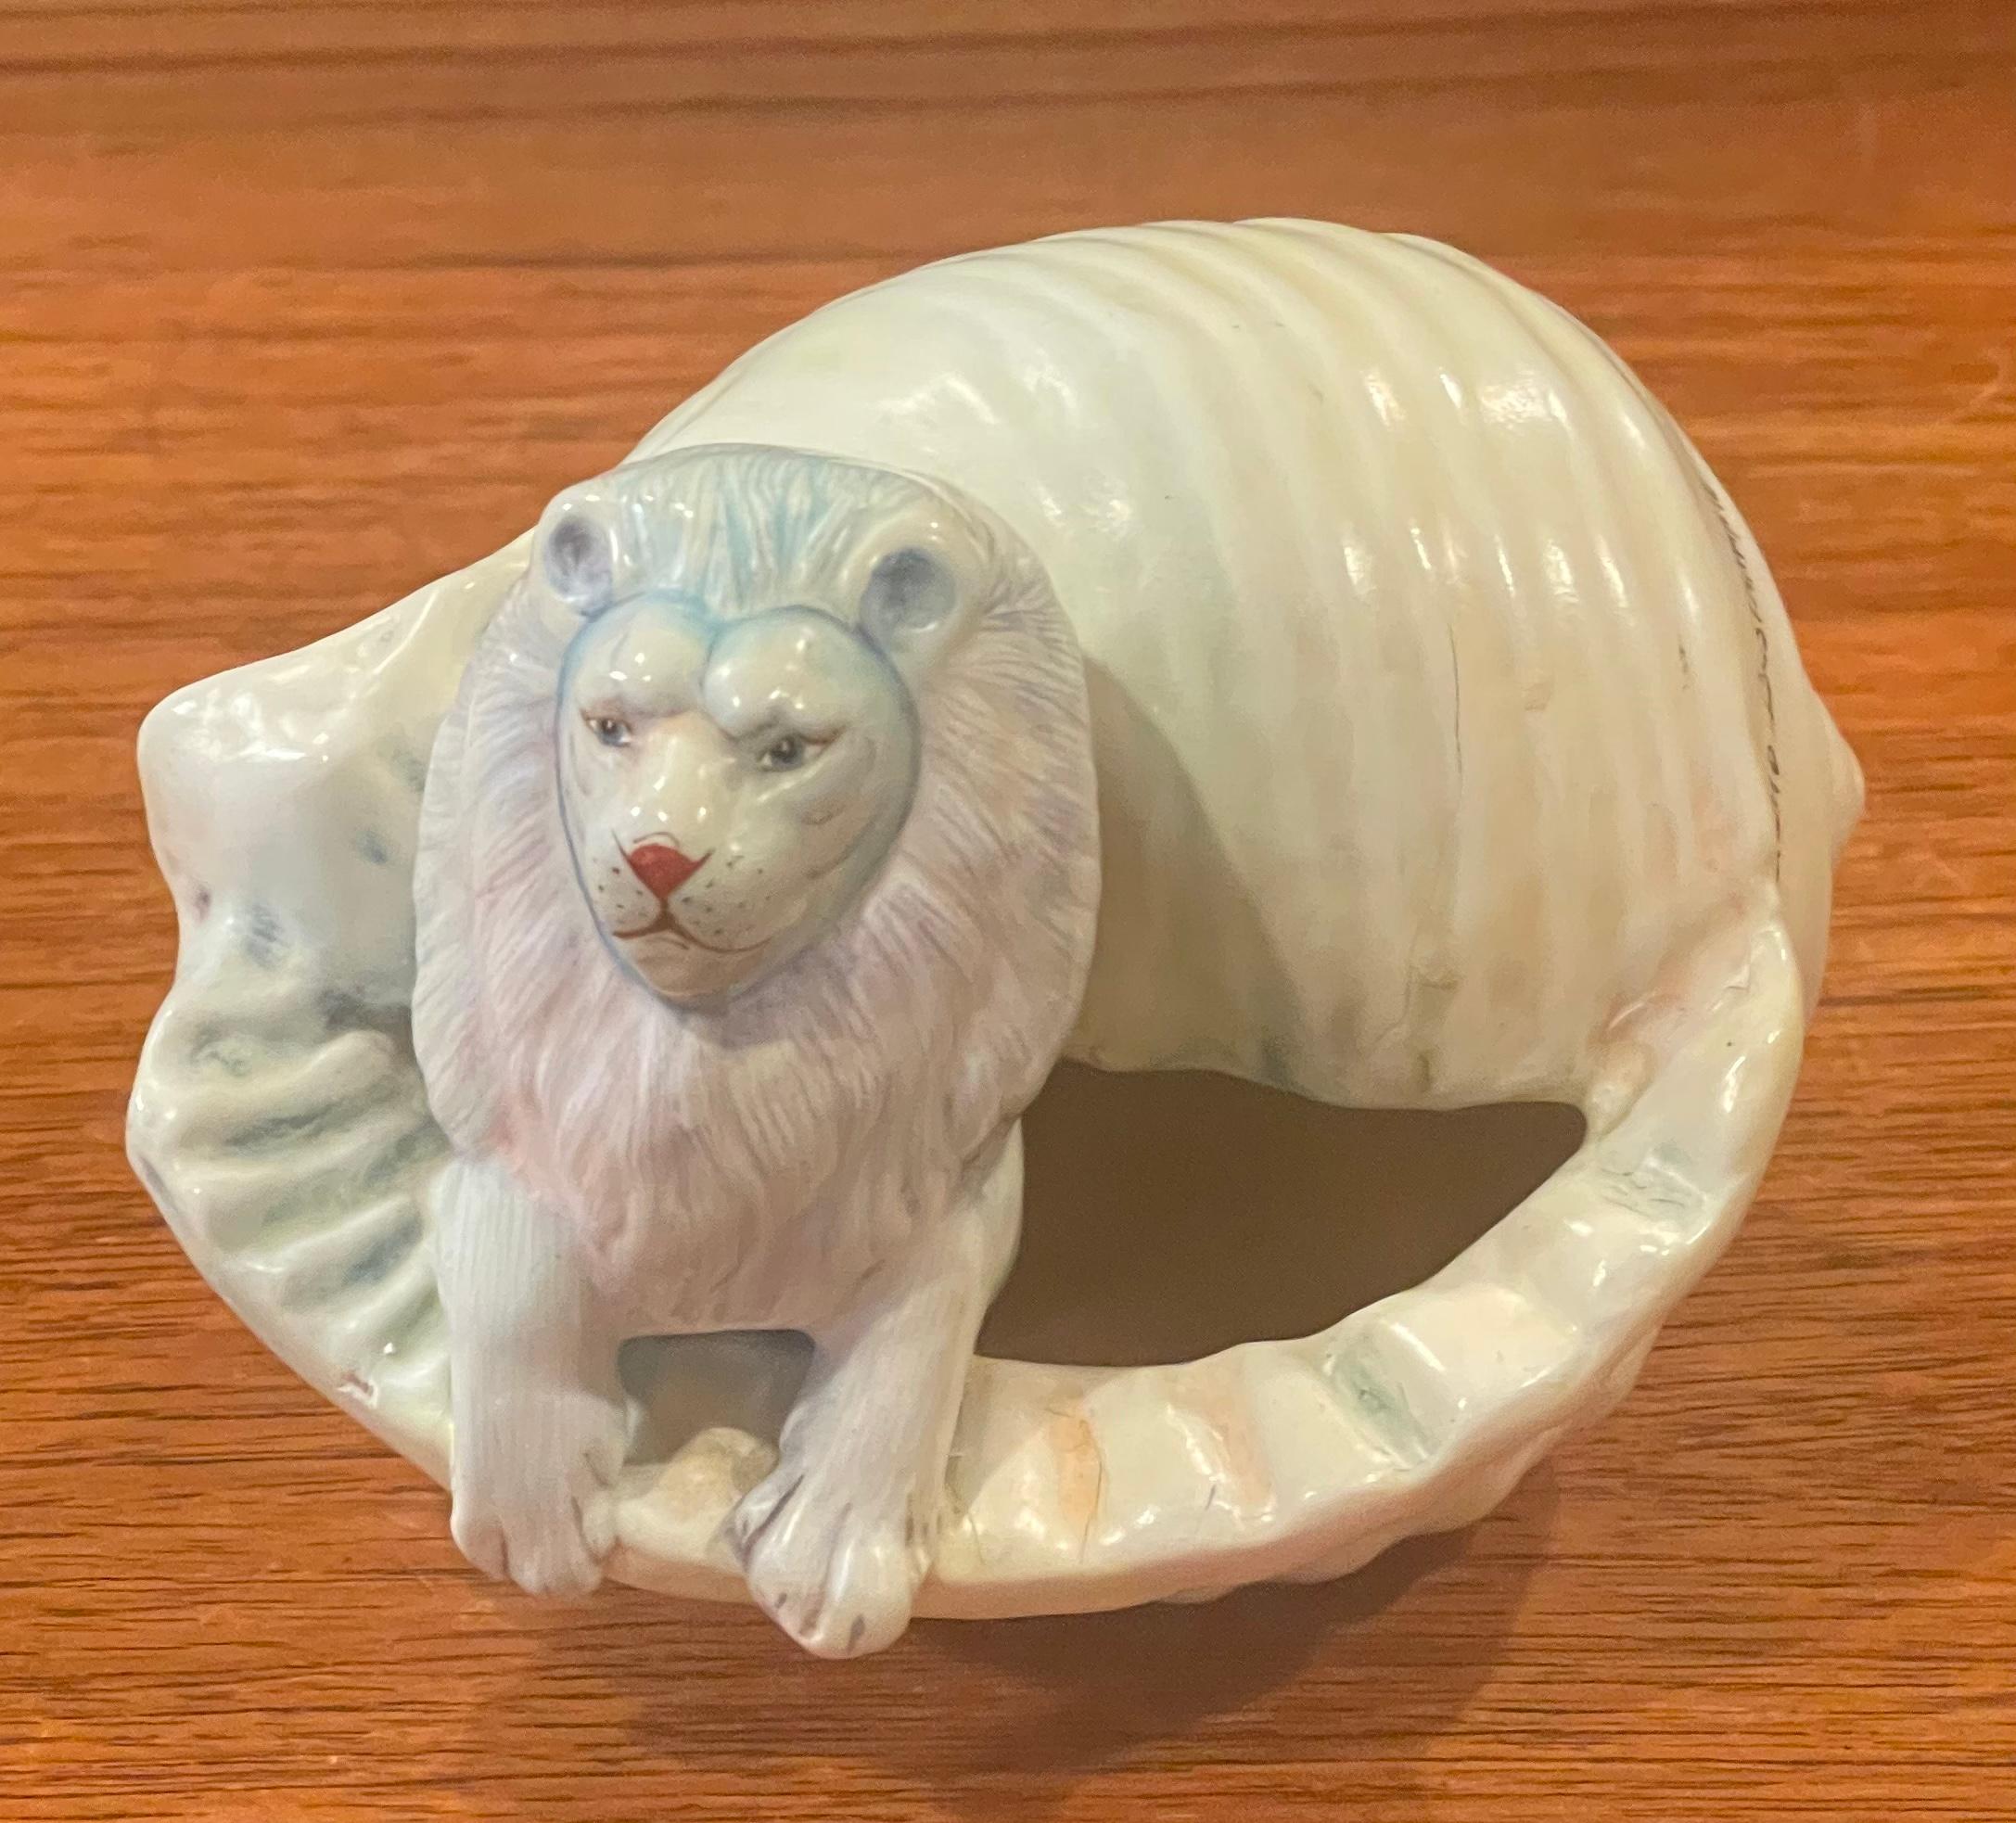 A very cool, unique and whimsical ceramic lion in conch shell sculpture by Mexican artist, Sergio Bustamante, circa 1995. The piece was acquired directly form the artist and is beautifully hand painted on ceramic; it measures 5